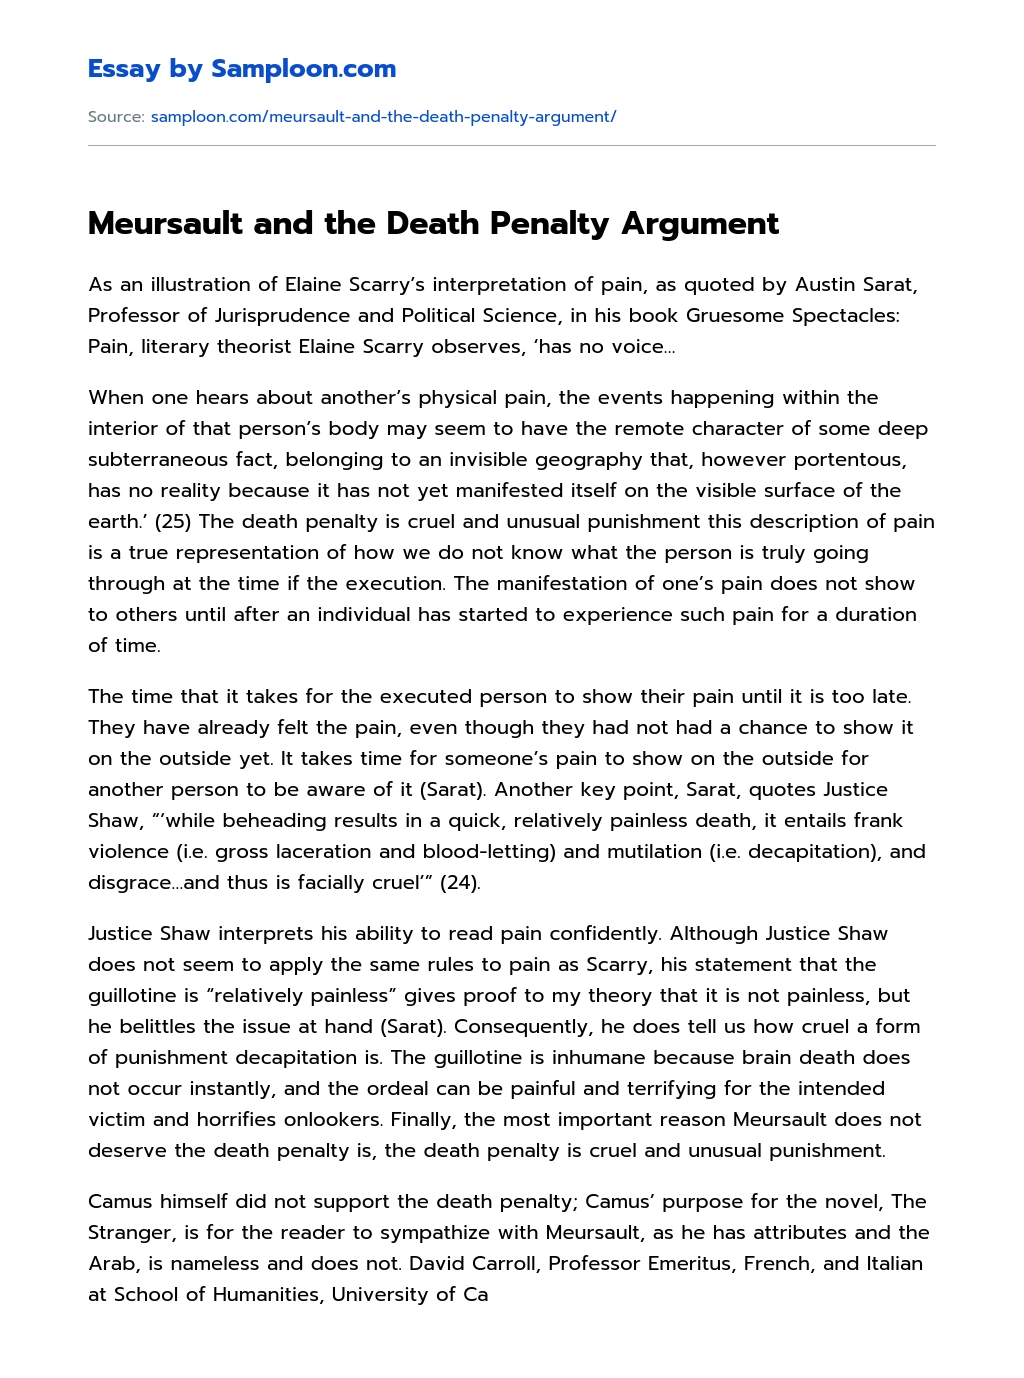 Meursault and the Death Penalty Argument essay